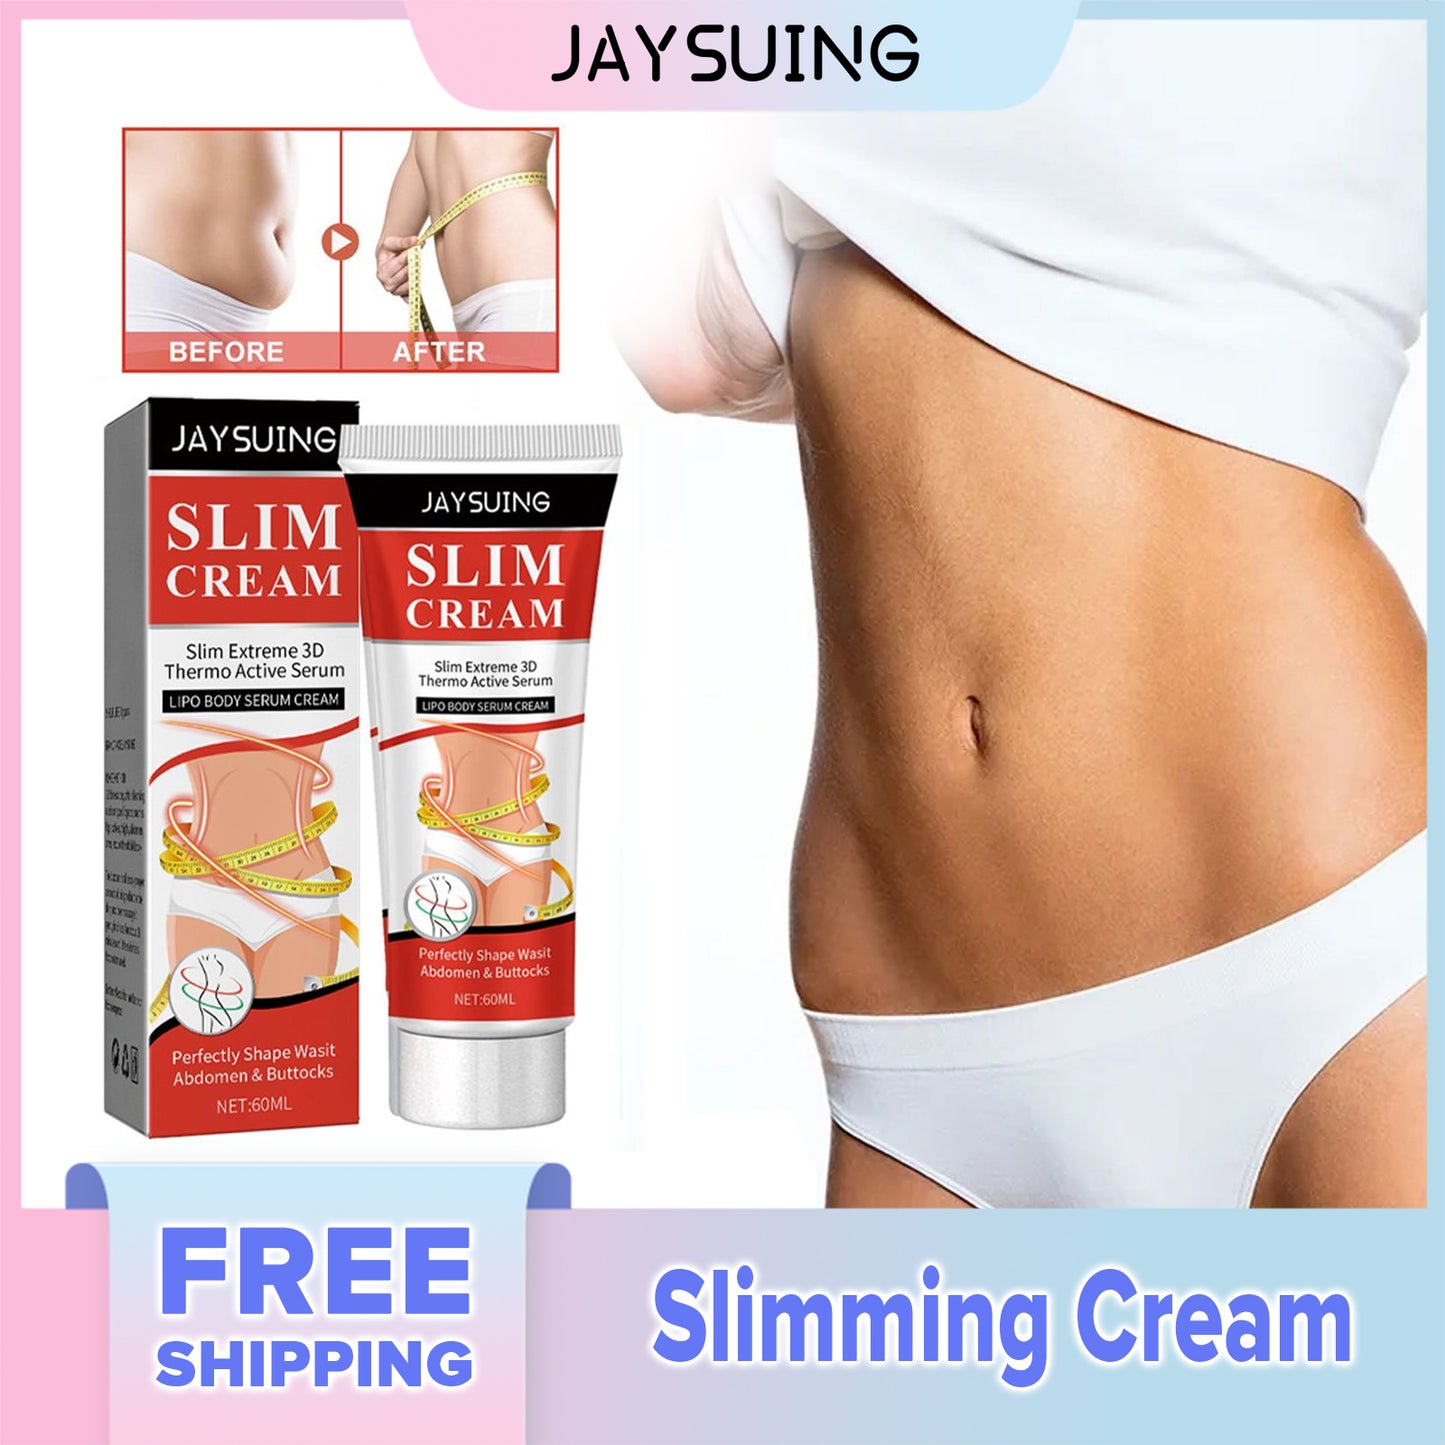 Jaysuing Slimming Cream Reduces The Abdomen Slimming Body Massage Cream Cellulite Remover Fat Burning Losing Weight for Belly(60ml)